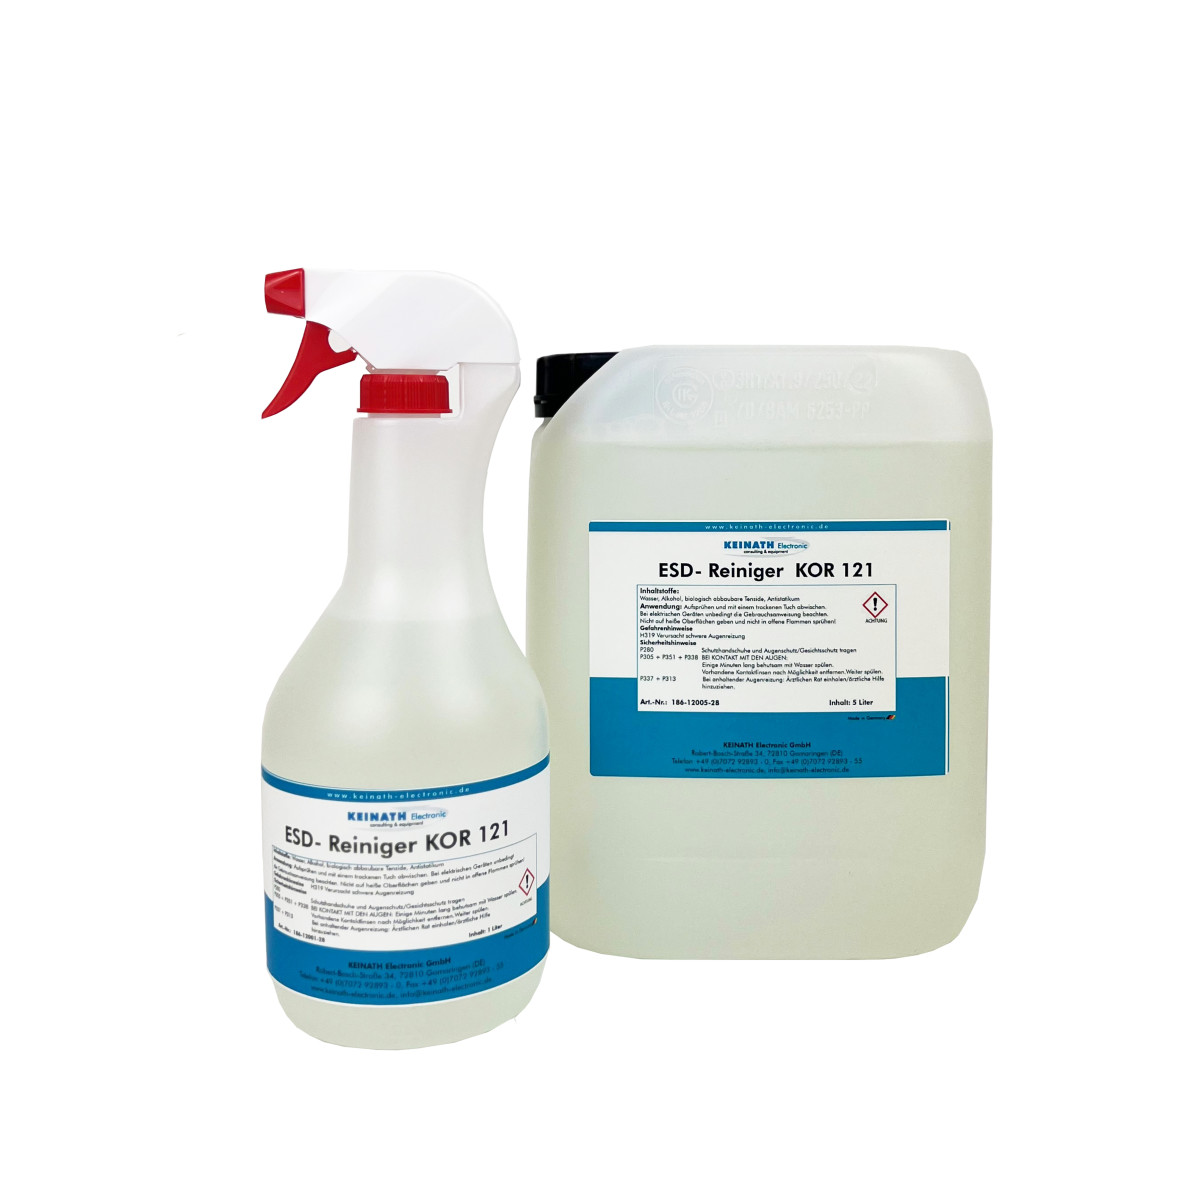 ESD surface cleaner KOR 121 with antistatic agent